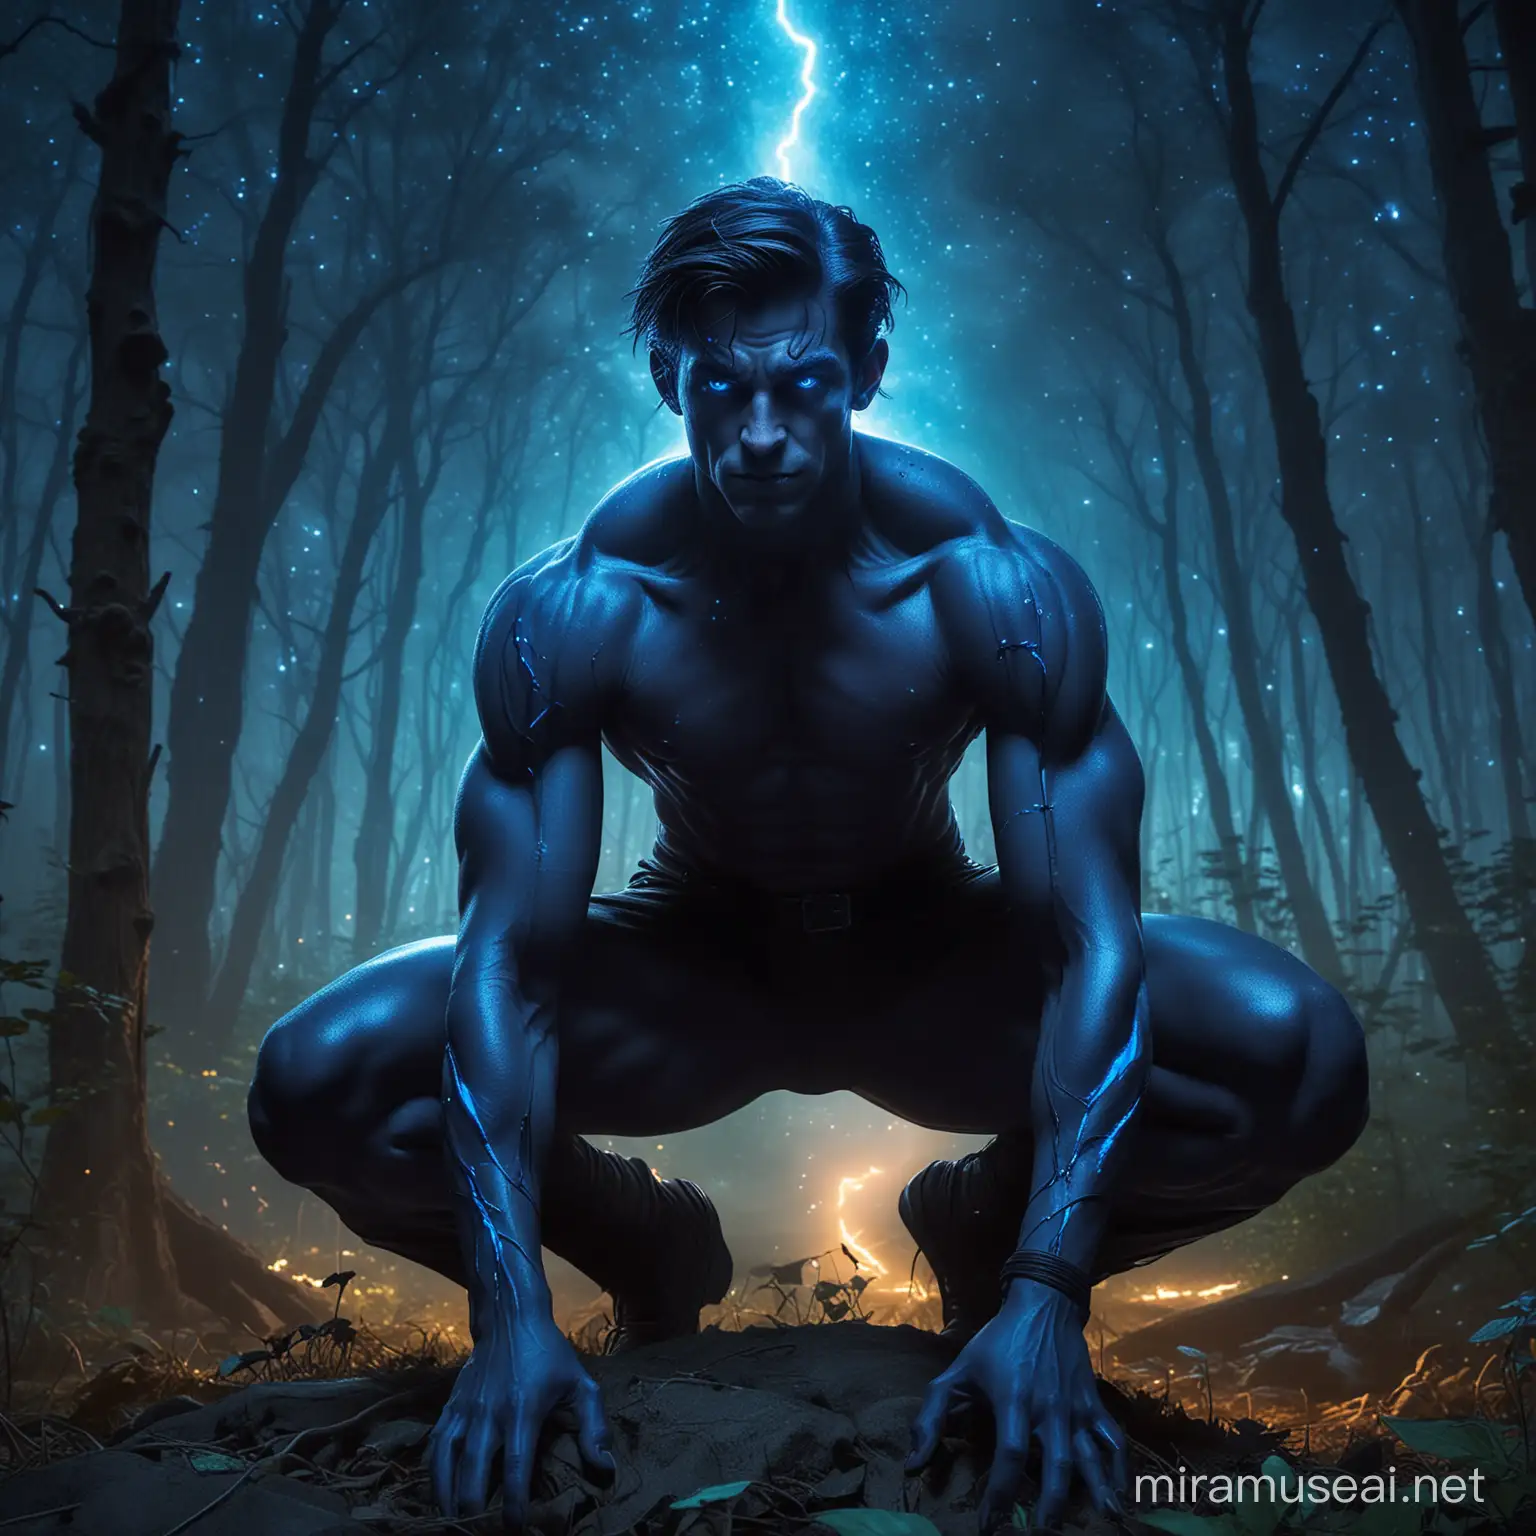 Sexy young teenage shirtless muscular Nightcrawler from the X-men, crouching in a forest by night. Blue neon colors ambient. The sky is full of stars.